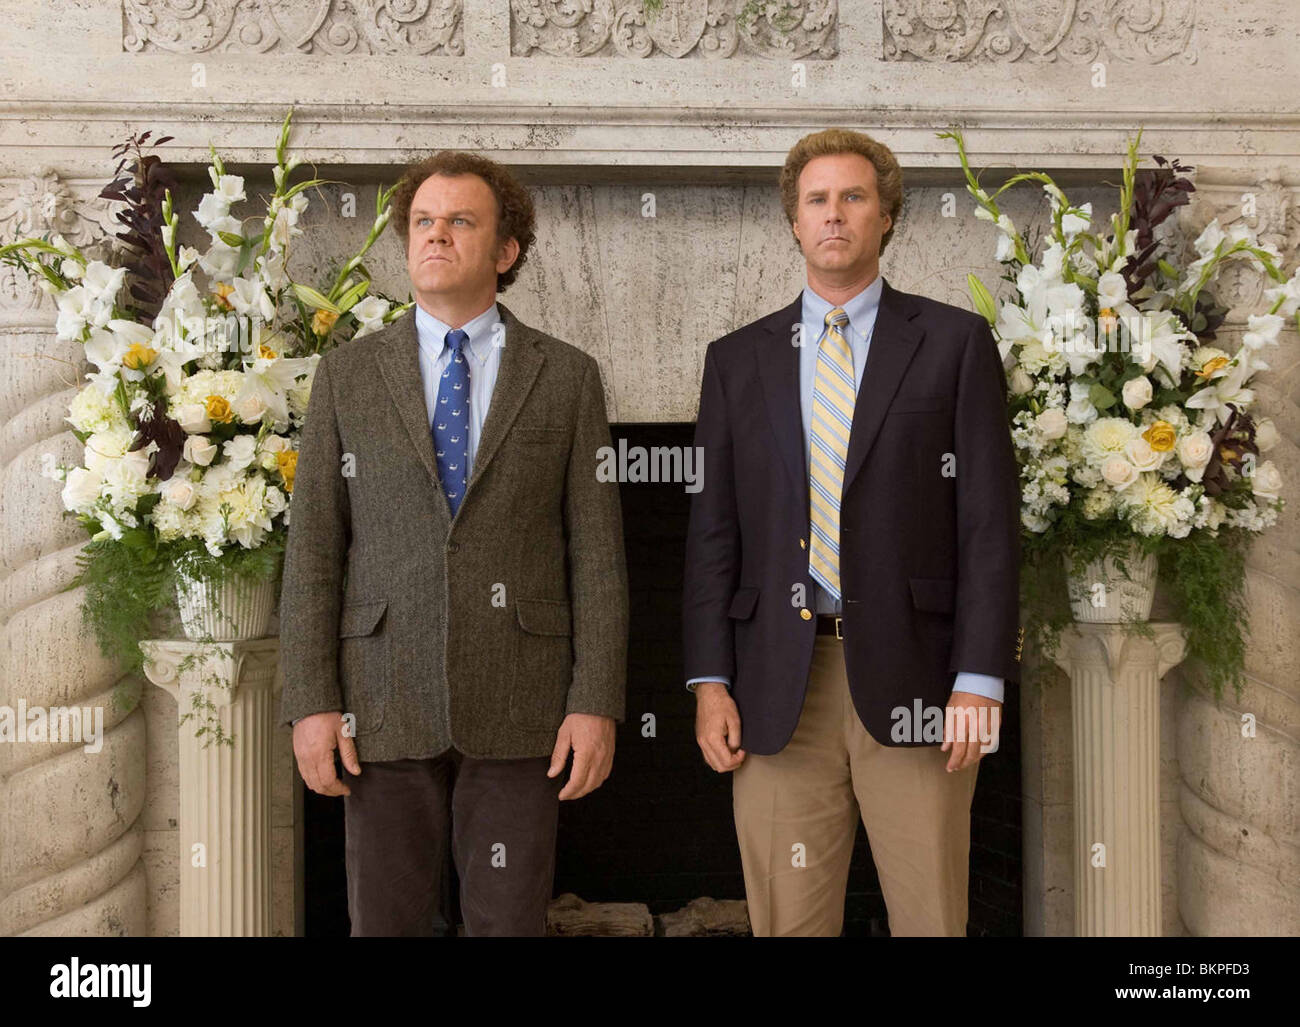 STEP BROTHERS JOHN C REILLY, WILL FERRELL STEP BROTHERS Date: 2008 Stock  Photo - Alamy